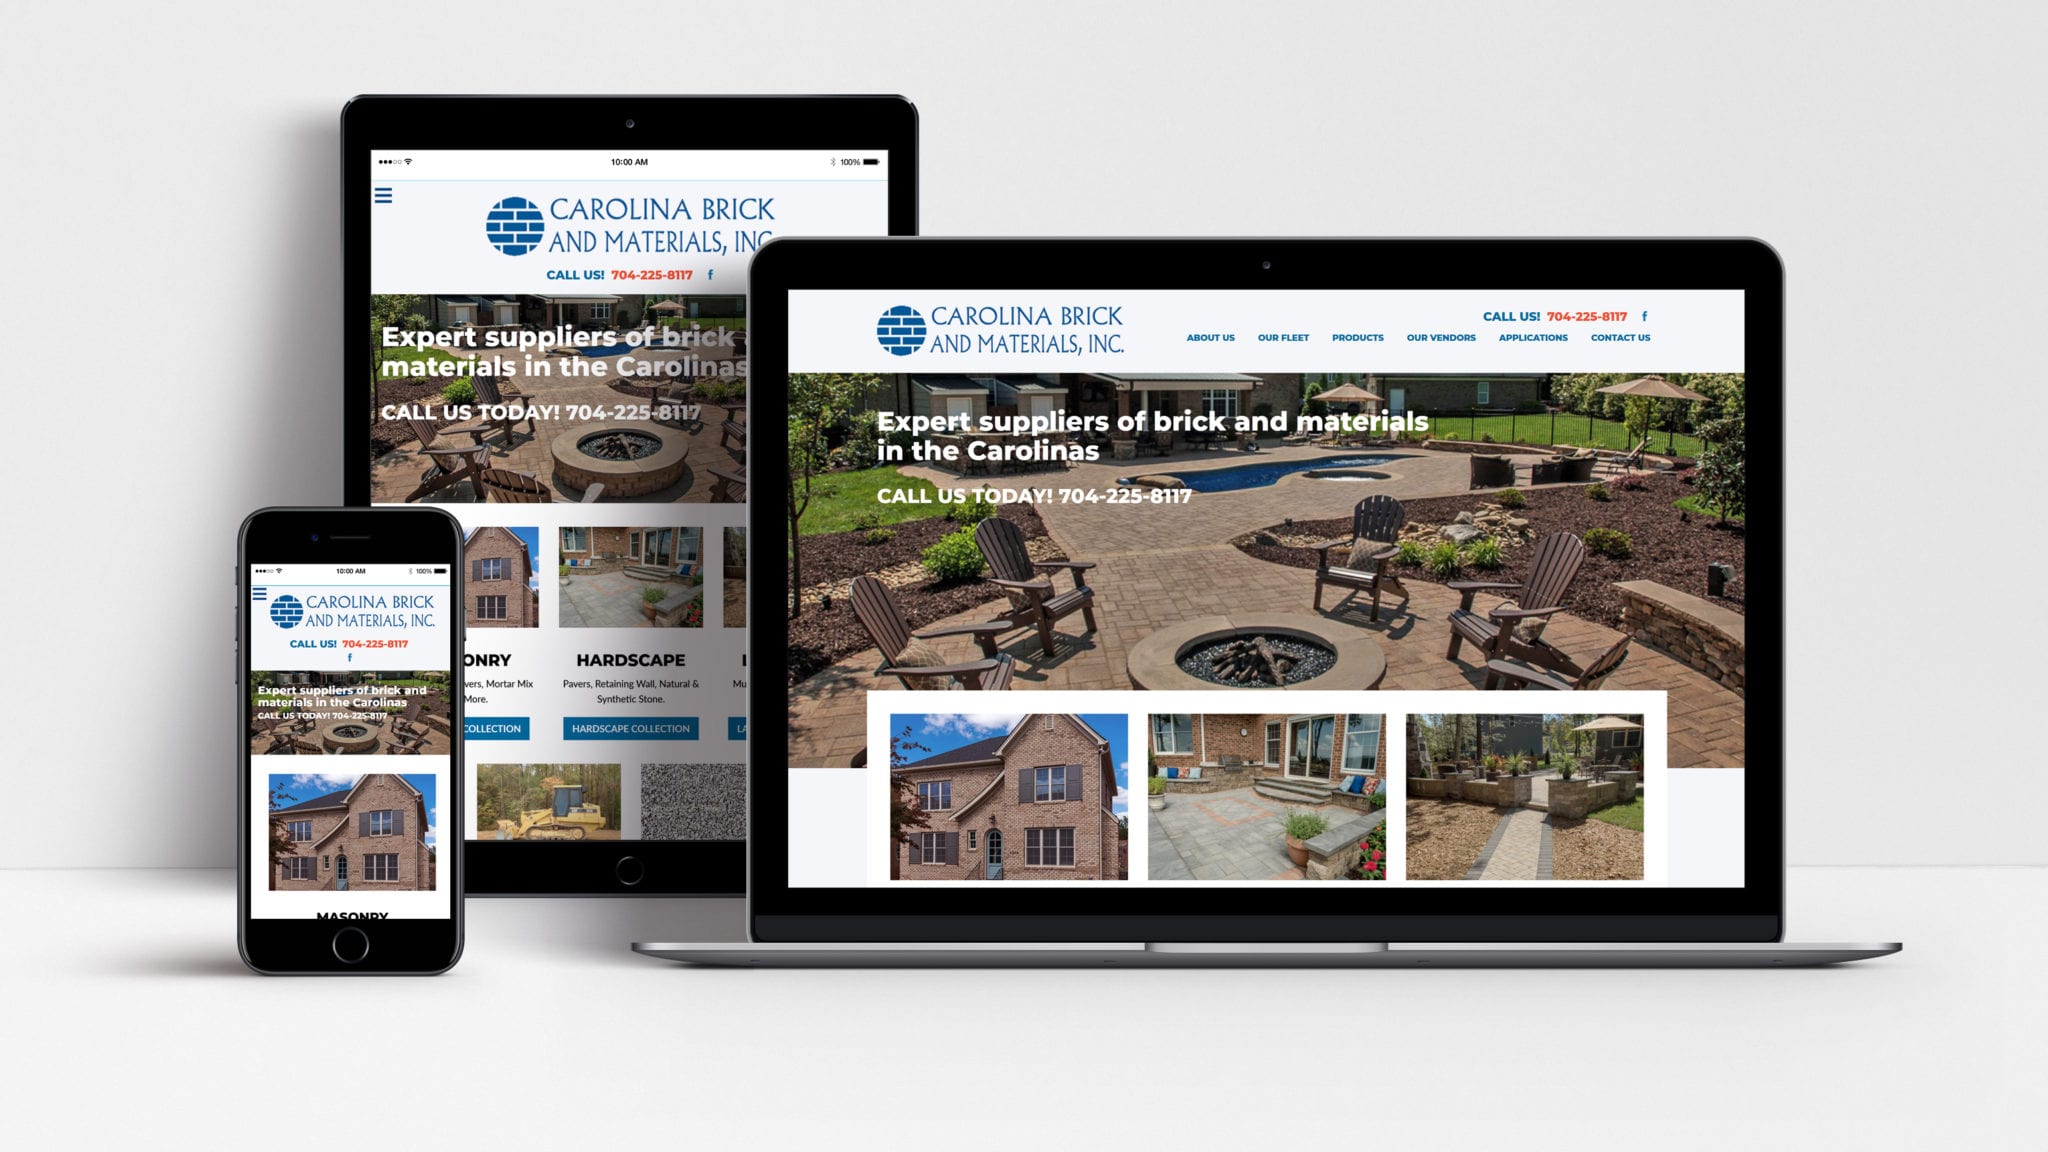 Carolina Brick and Materials website shown on laptop, tablet and mobile